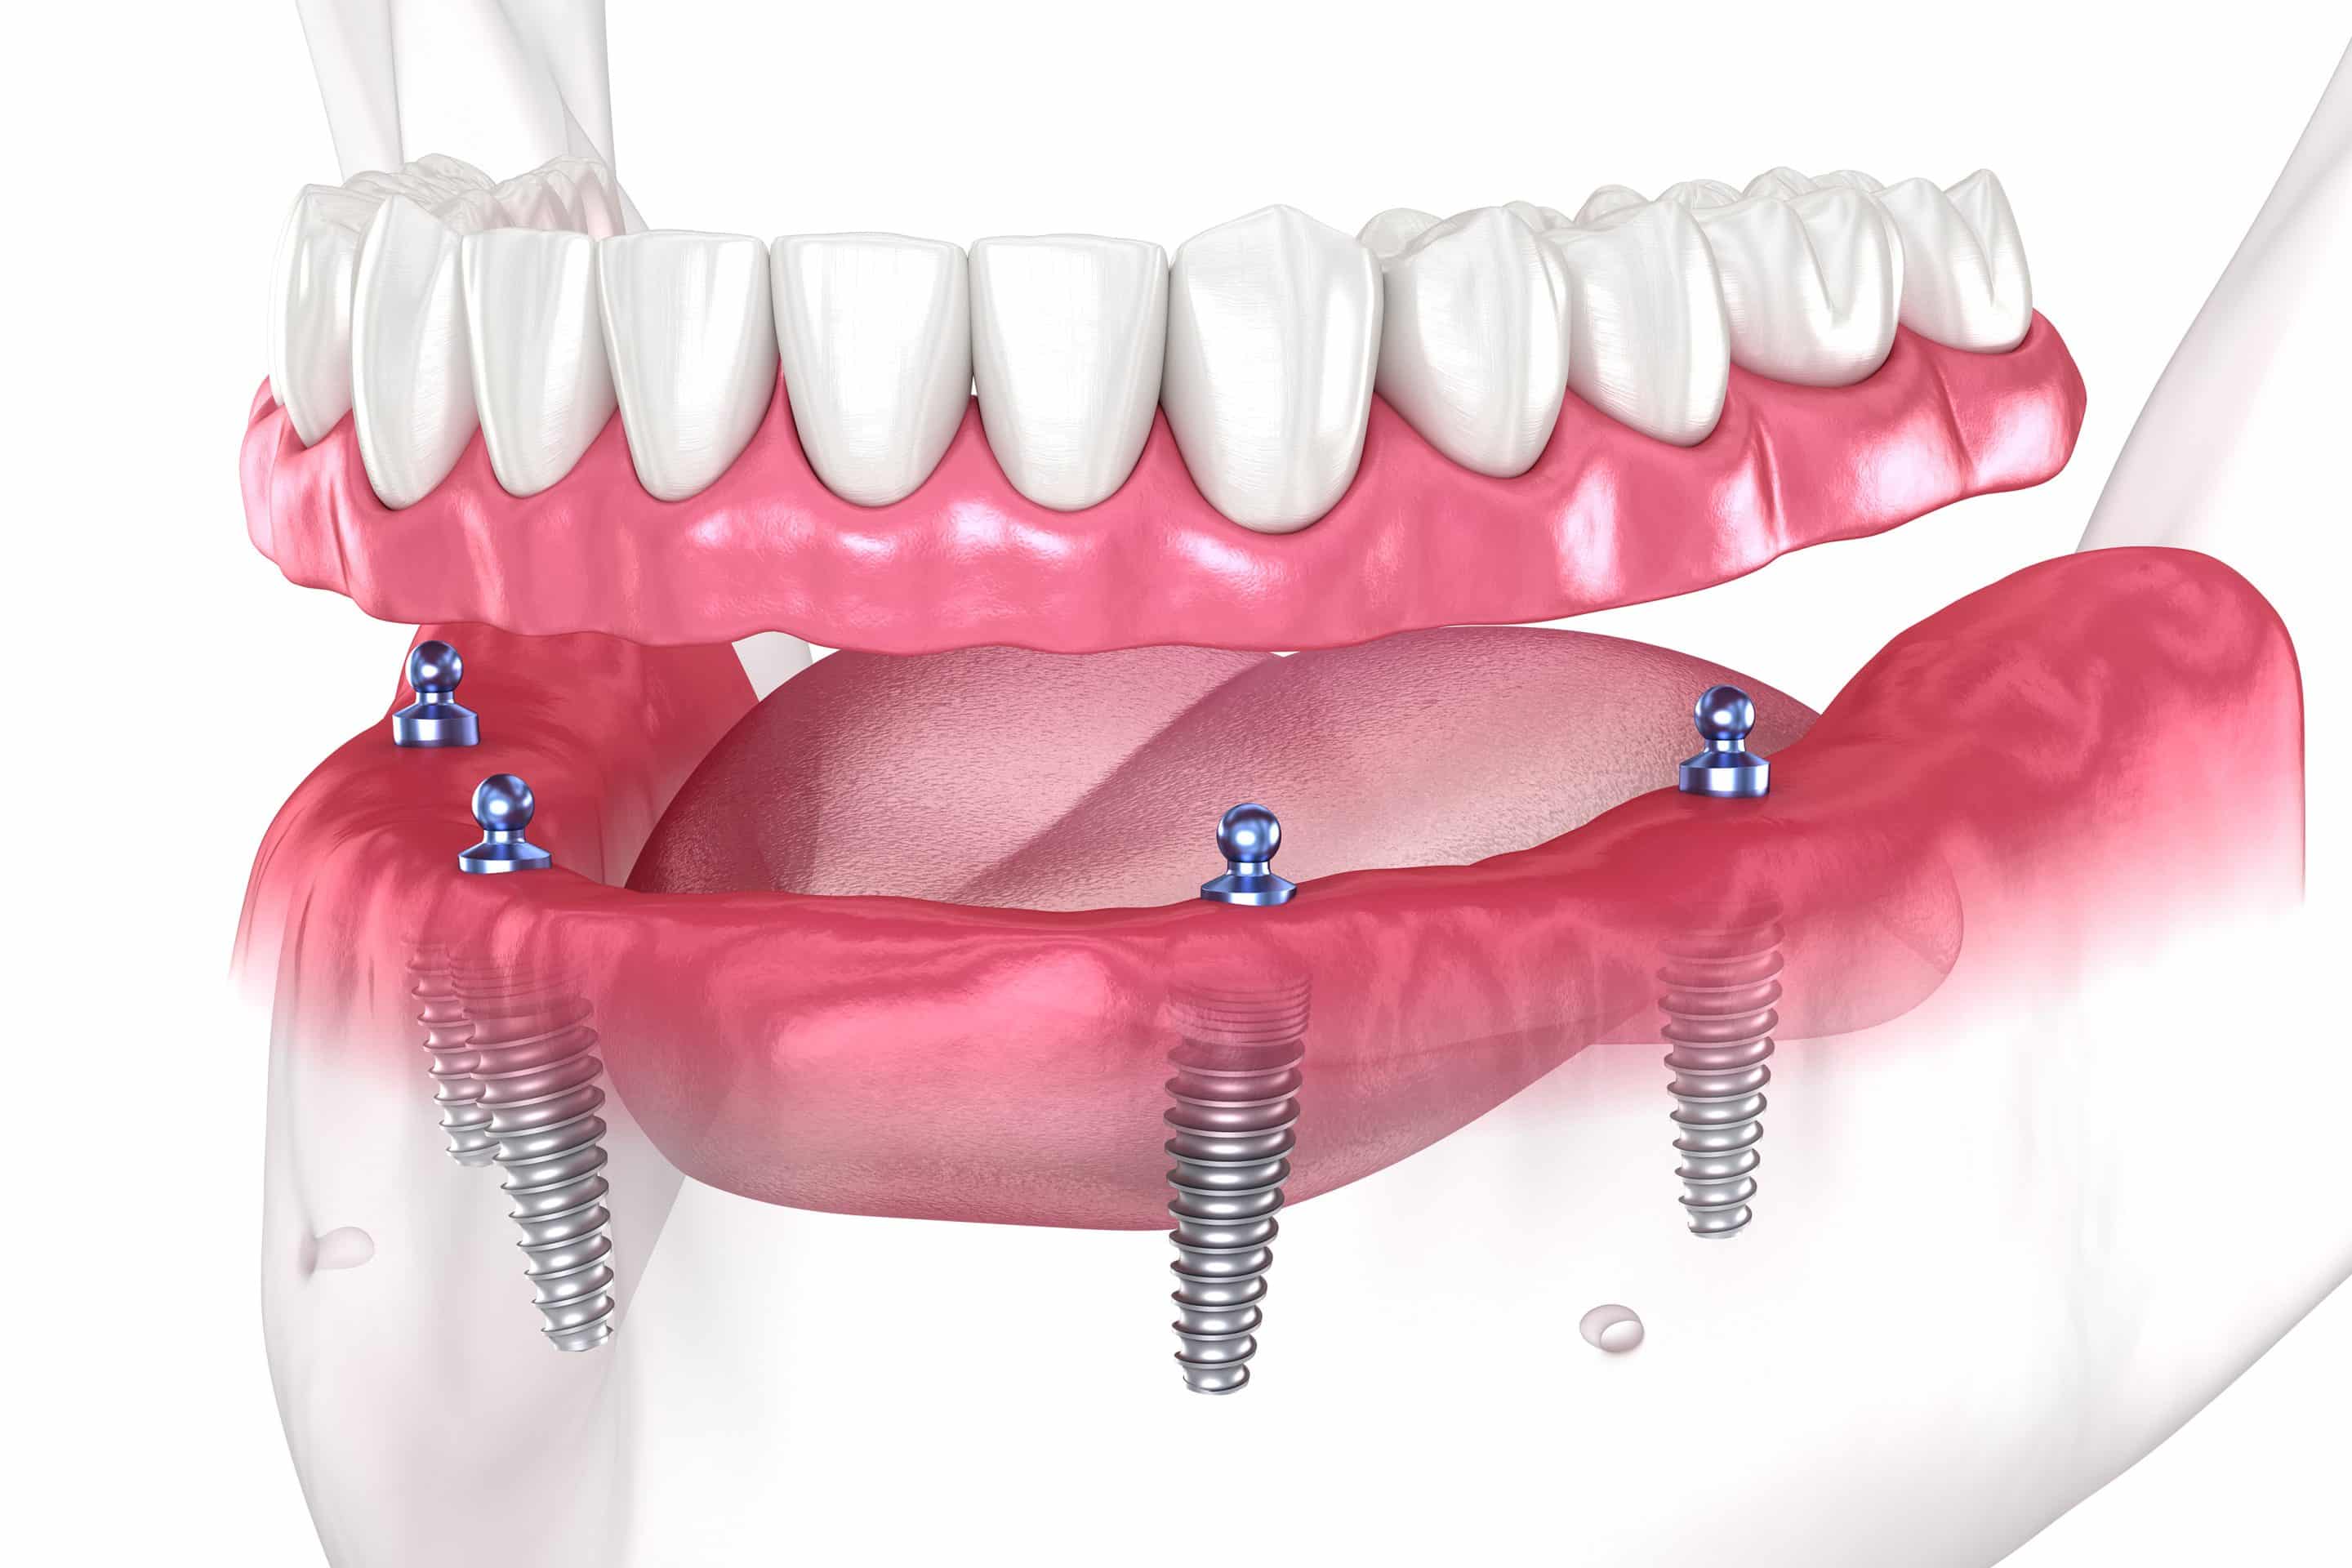 all-on-4 implants at Smiles Only